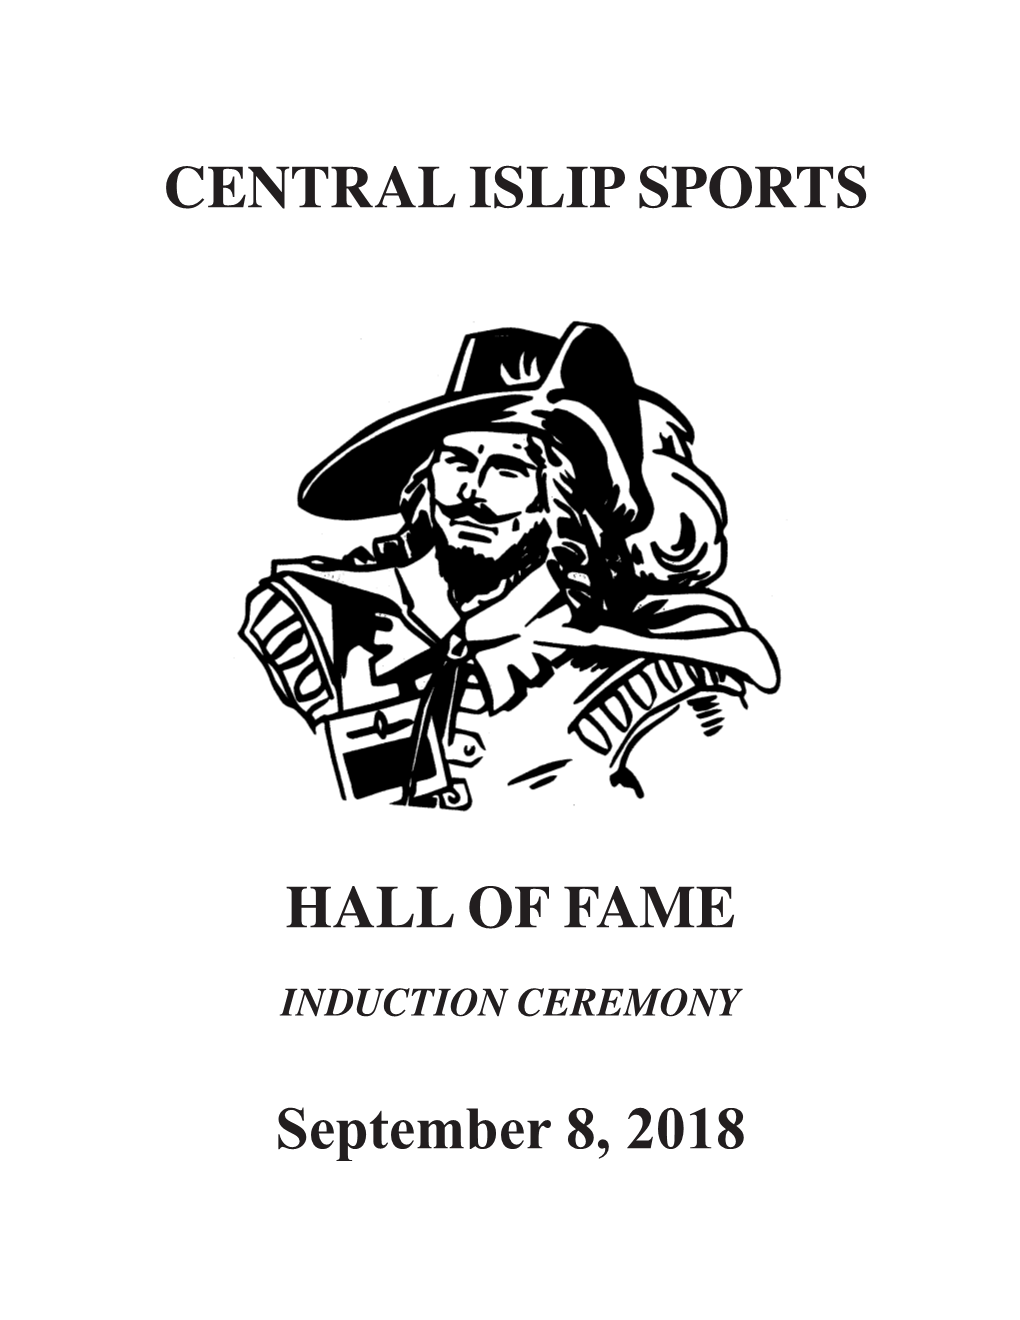 CENTRAL ISLIP SPORTS HALL of FAME September 8, 2018